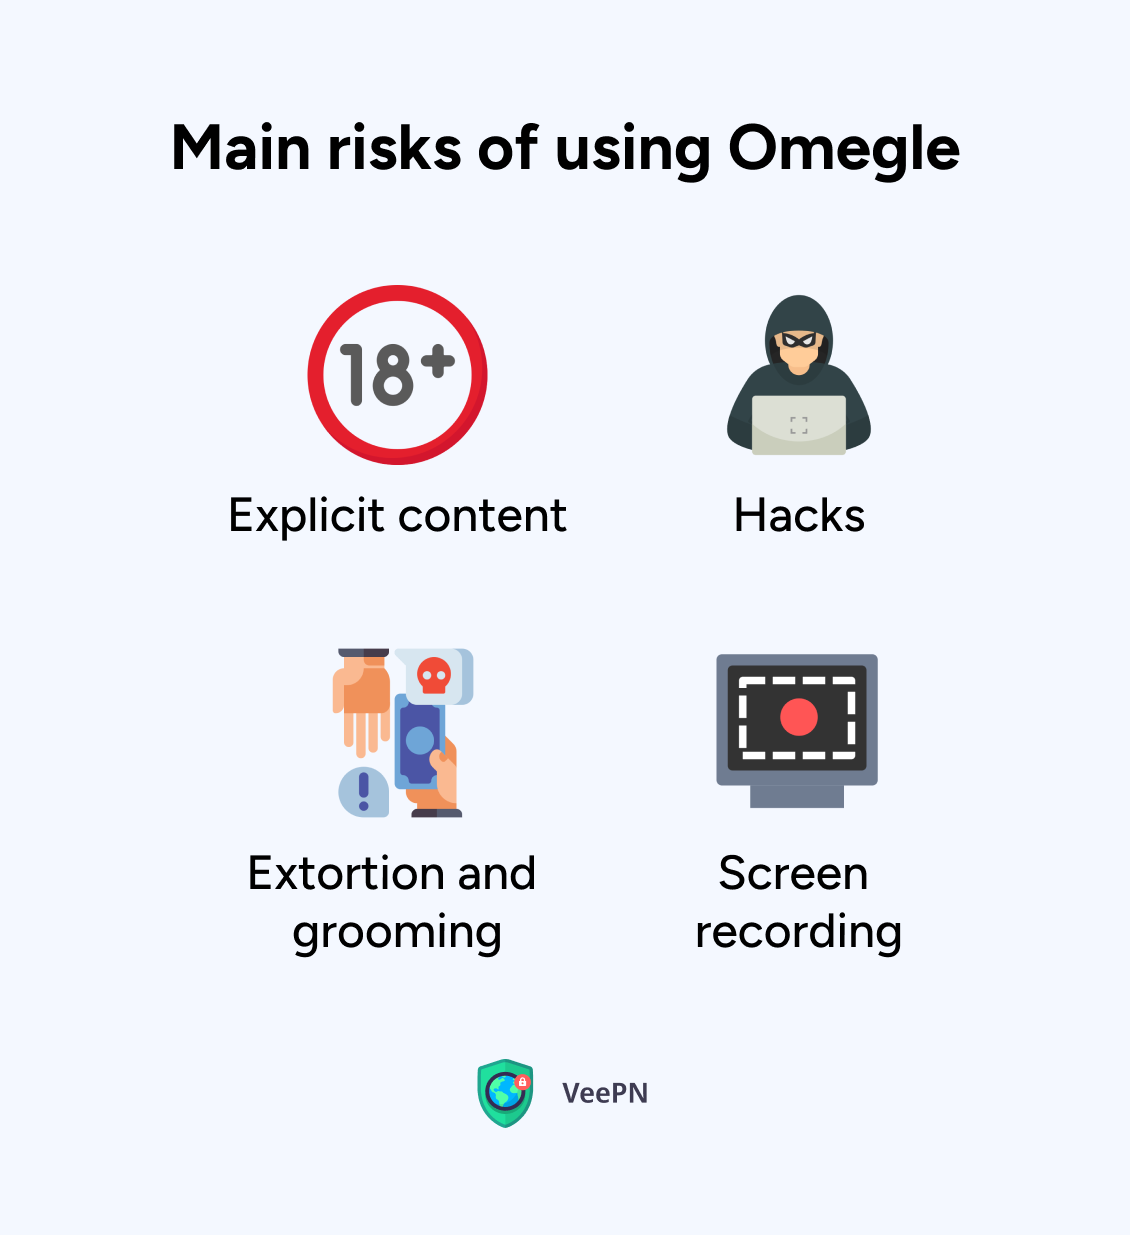 Main risks associated with Omegle